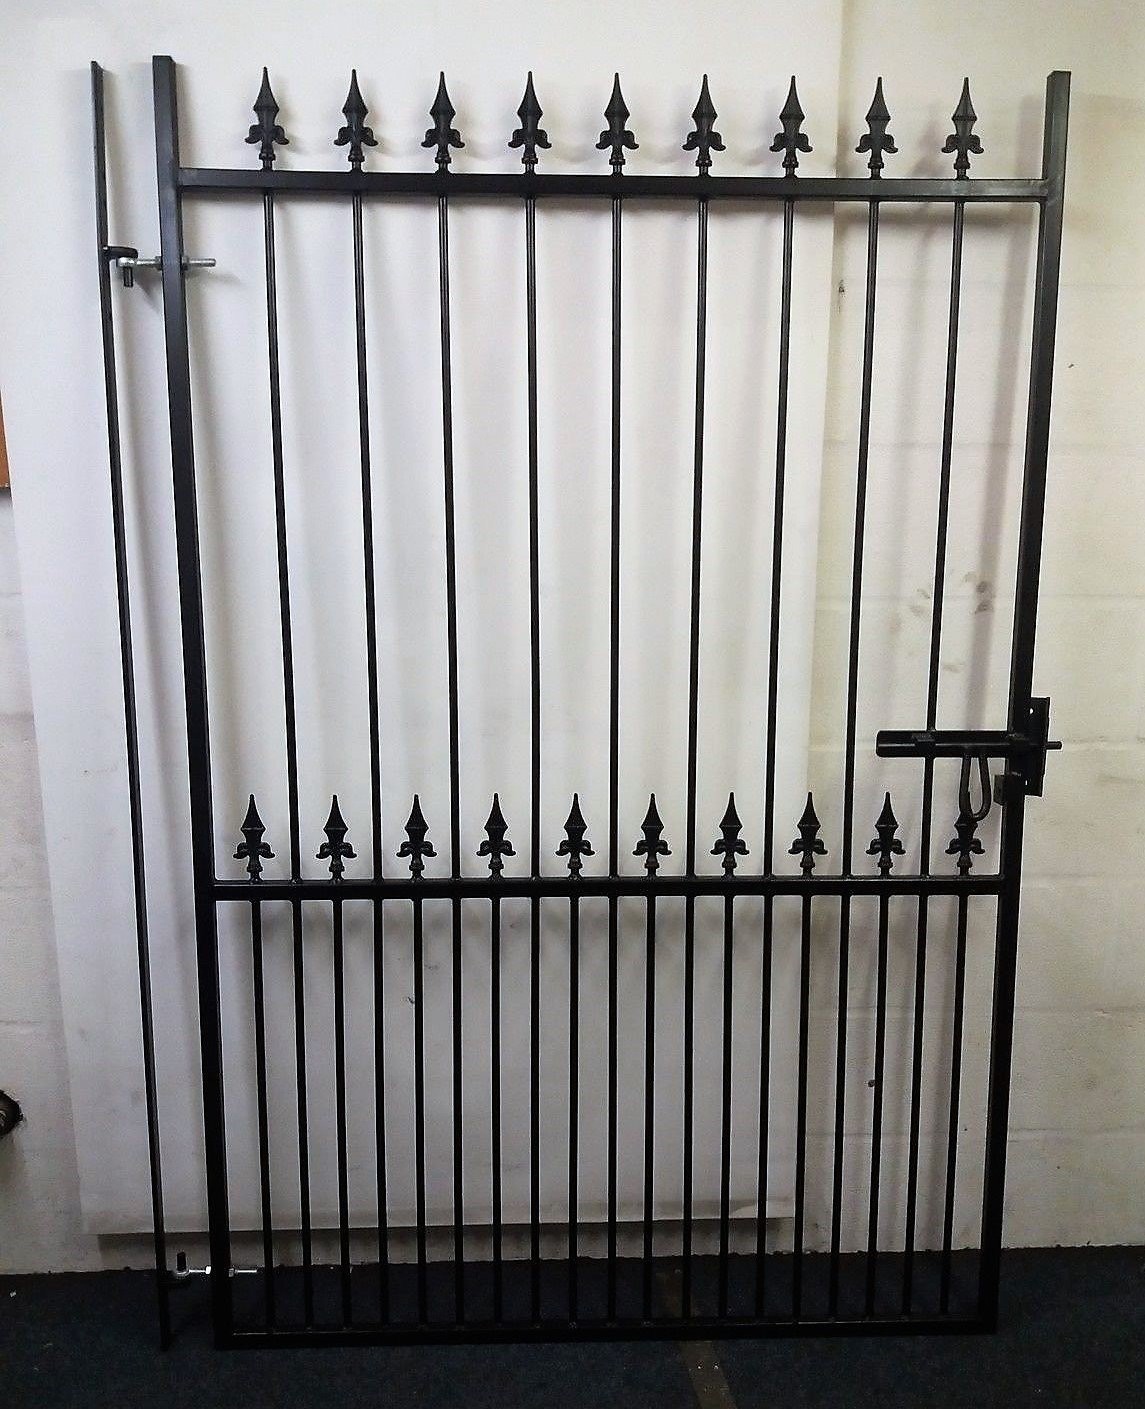 HKS098, STEEL, IRON, METAL SIDE, PEDESTRIAN, GATE, DOOR, GRILL WITH SPIKES